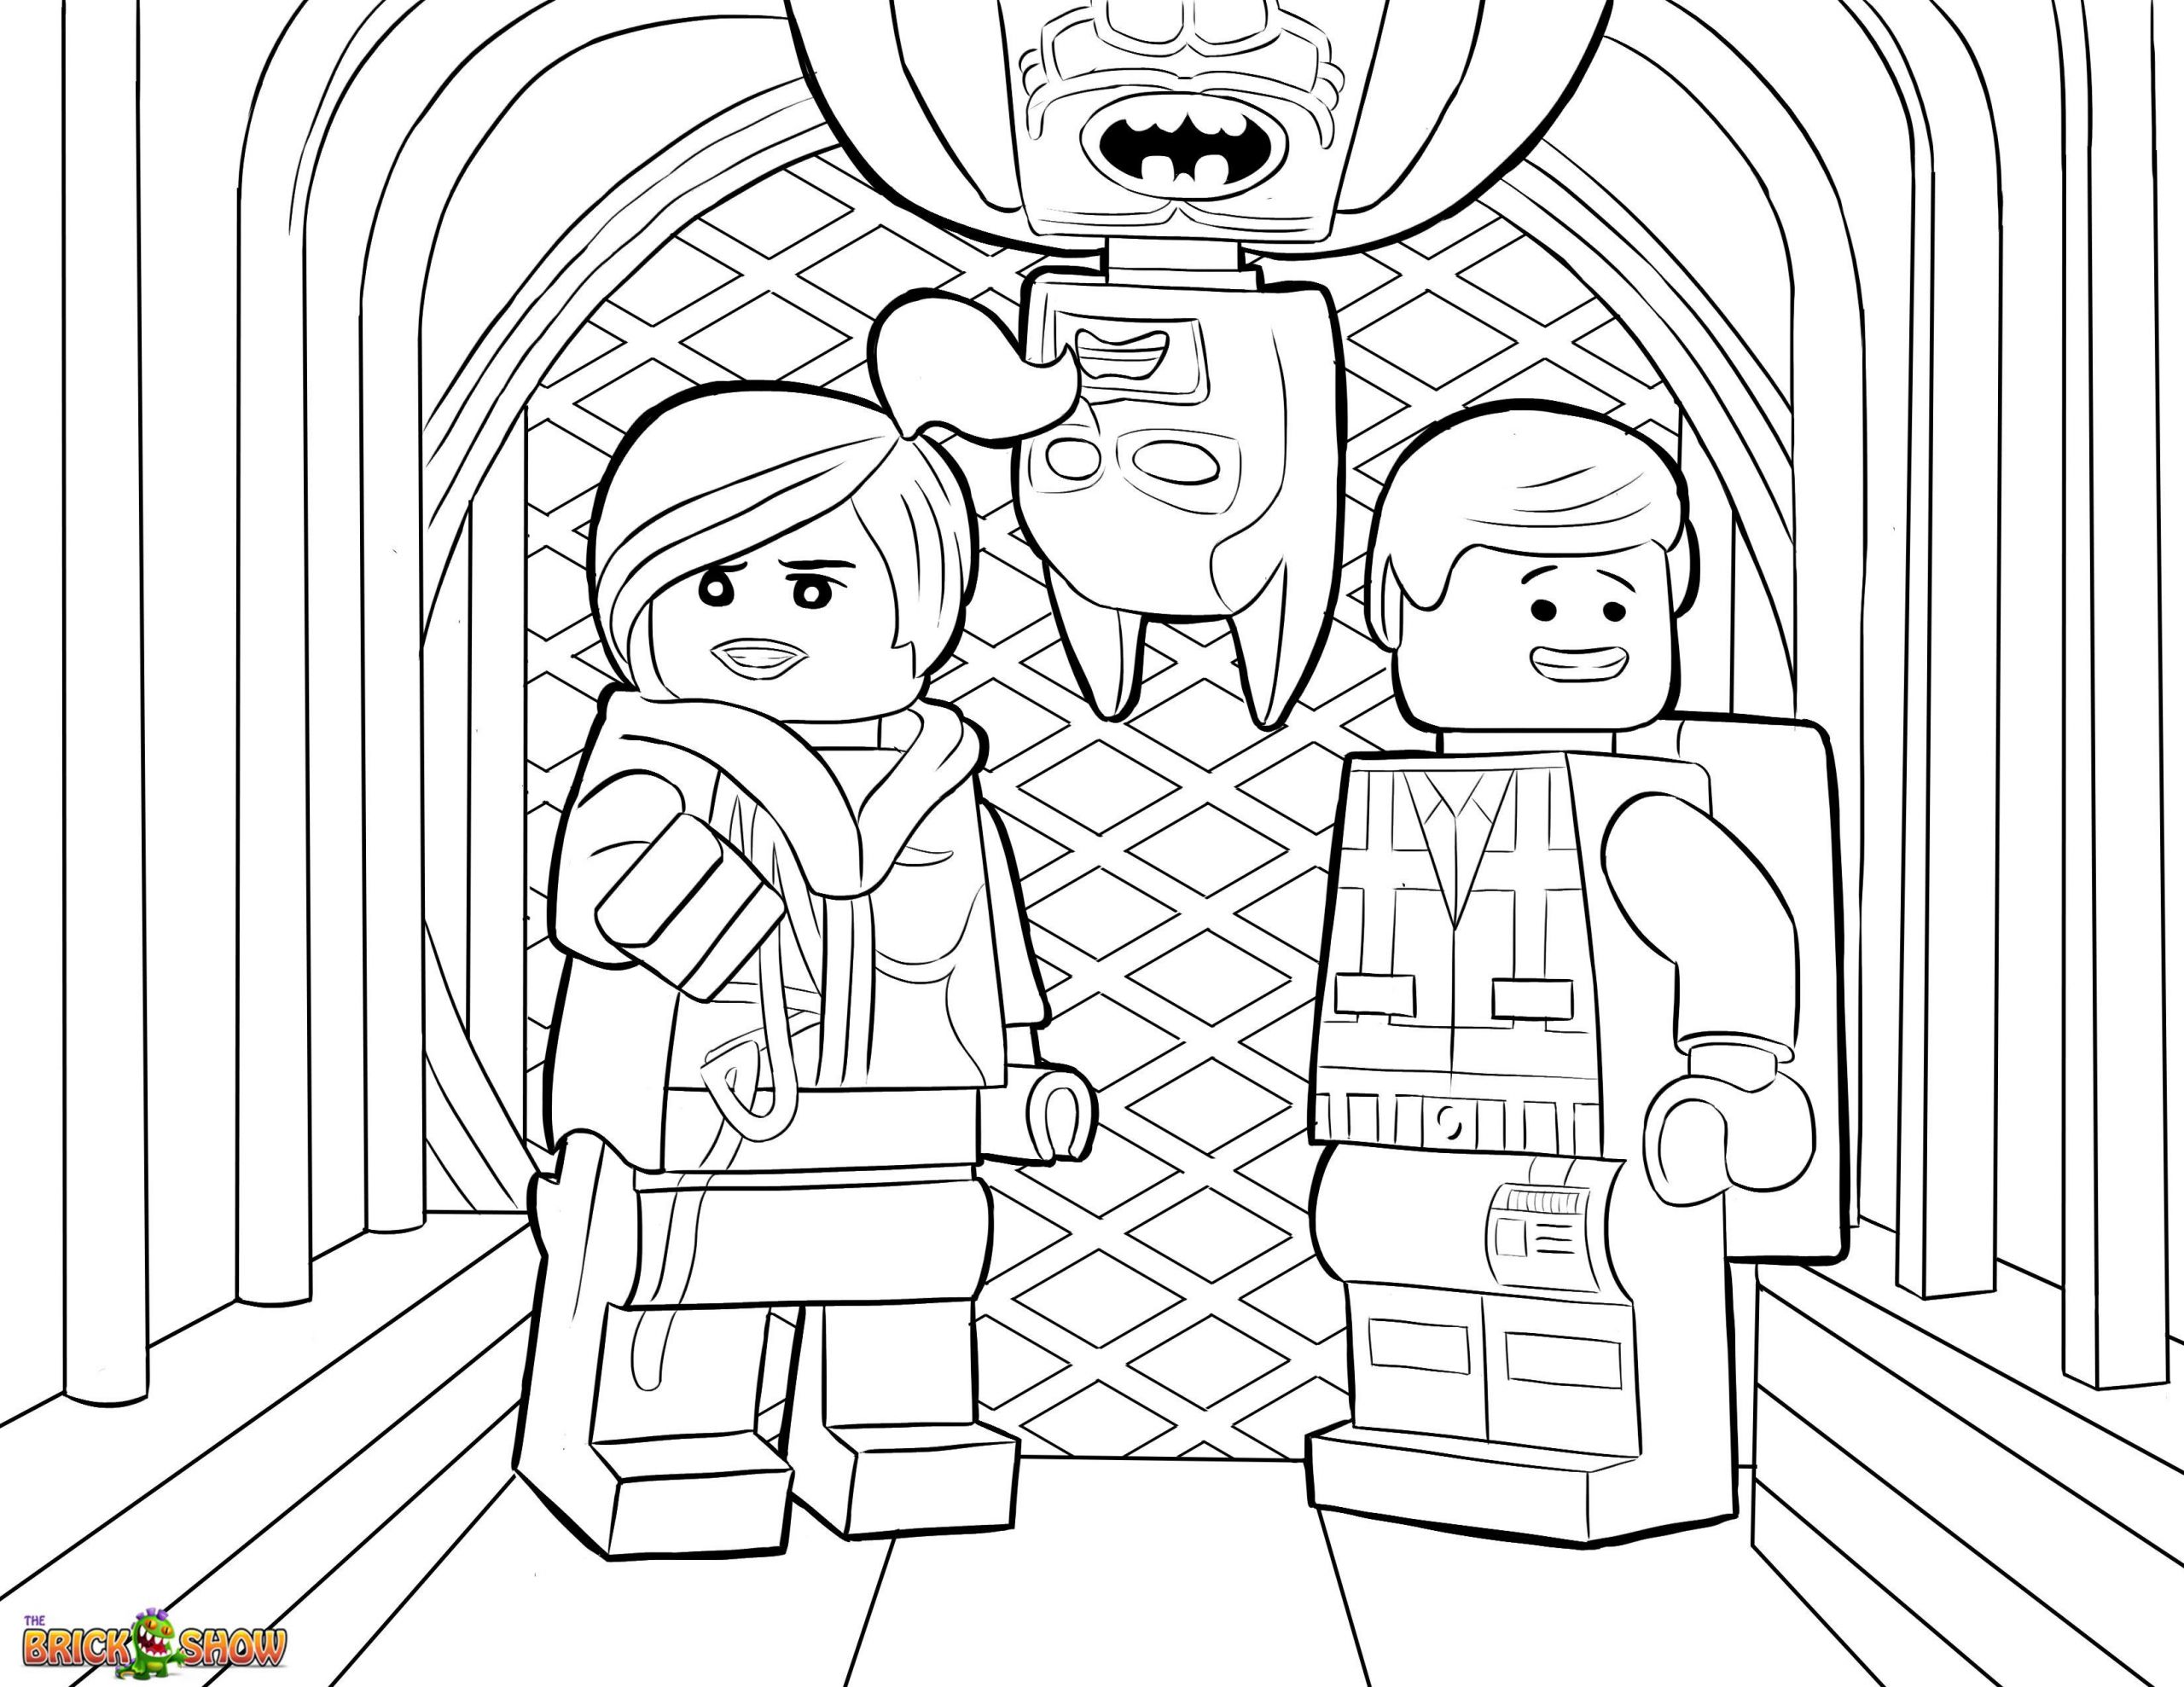 Coloring Pages For Boys Lego
 The LEGO Movie Coloring Page LEGO Wyldstyle Emmet